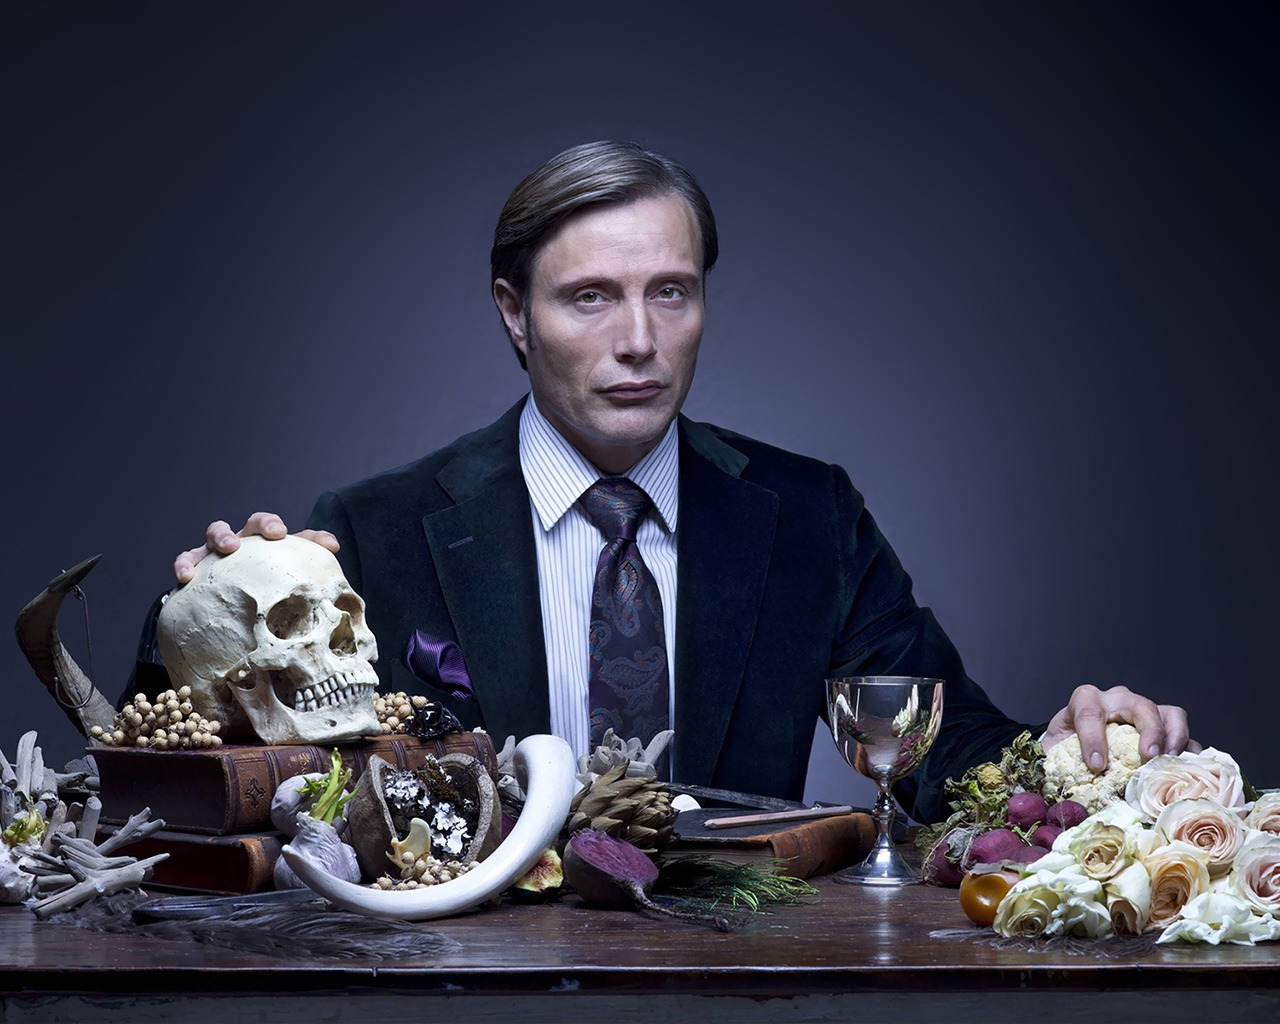 Dr Hannibal Lecter for 1280 x 1024 resolution